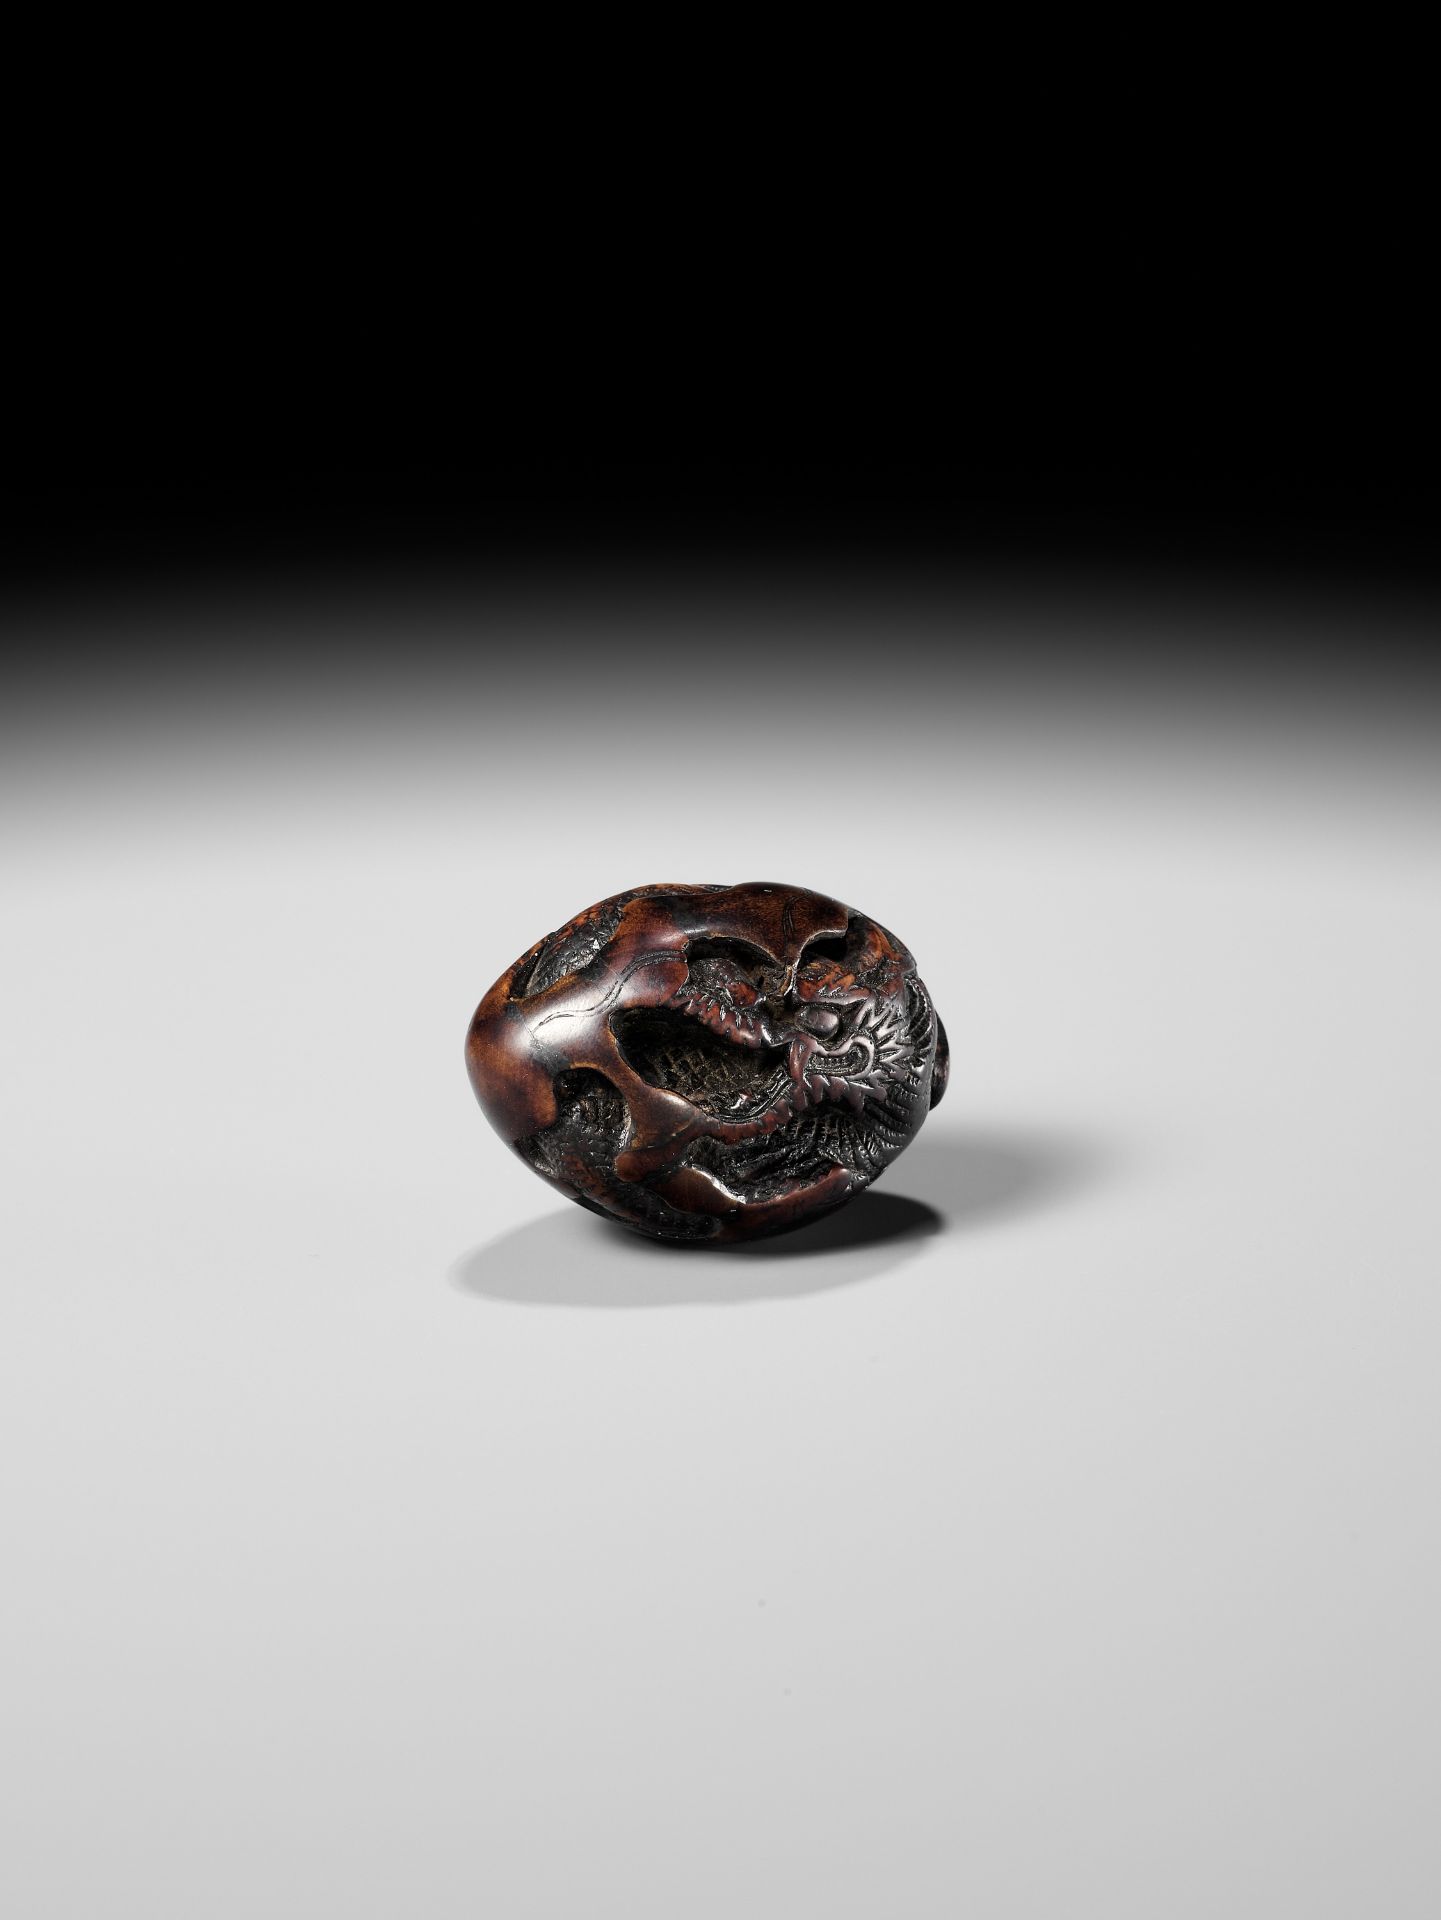 NAITO TOYOMASA: A FINE WOOD NETSUKE OF A DRAGON EMERGING FROM AN EGG - Image 4 of 15